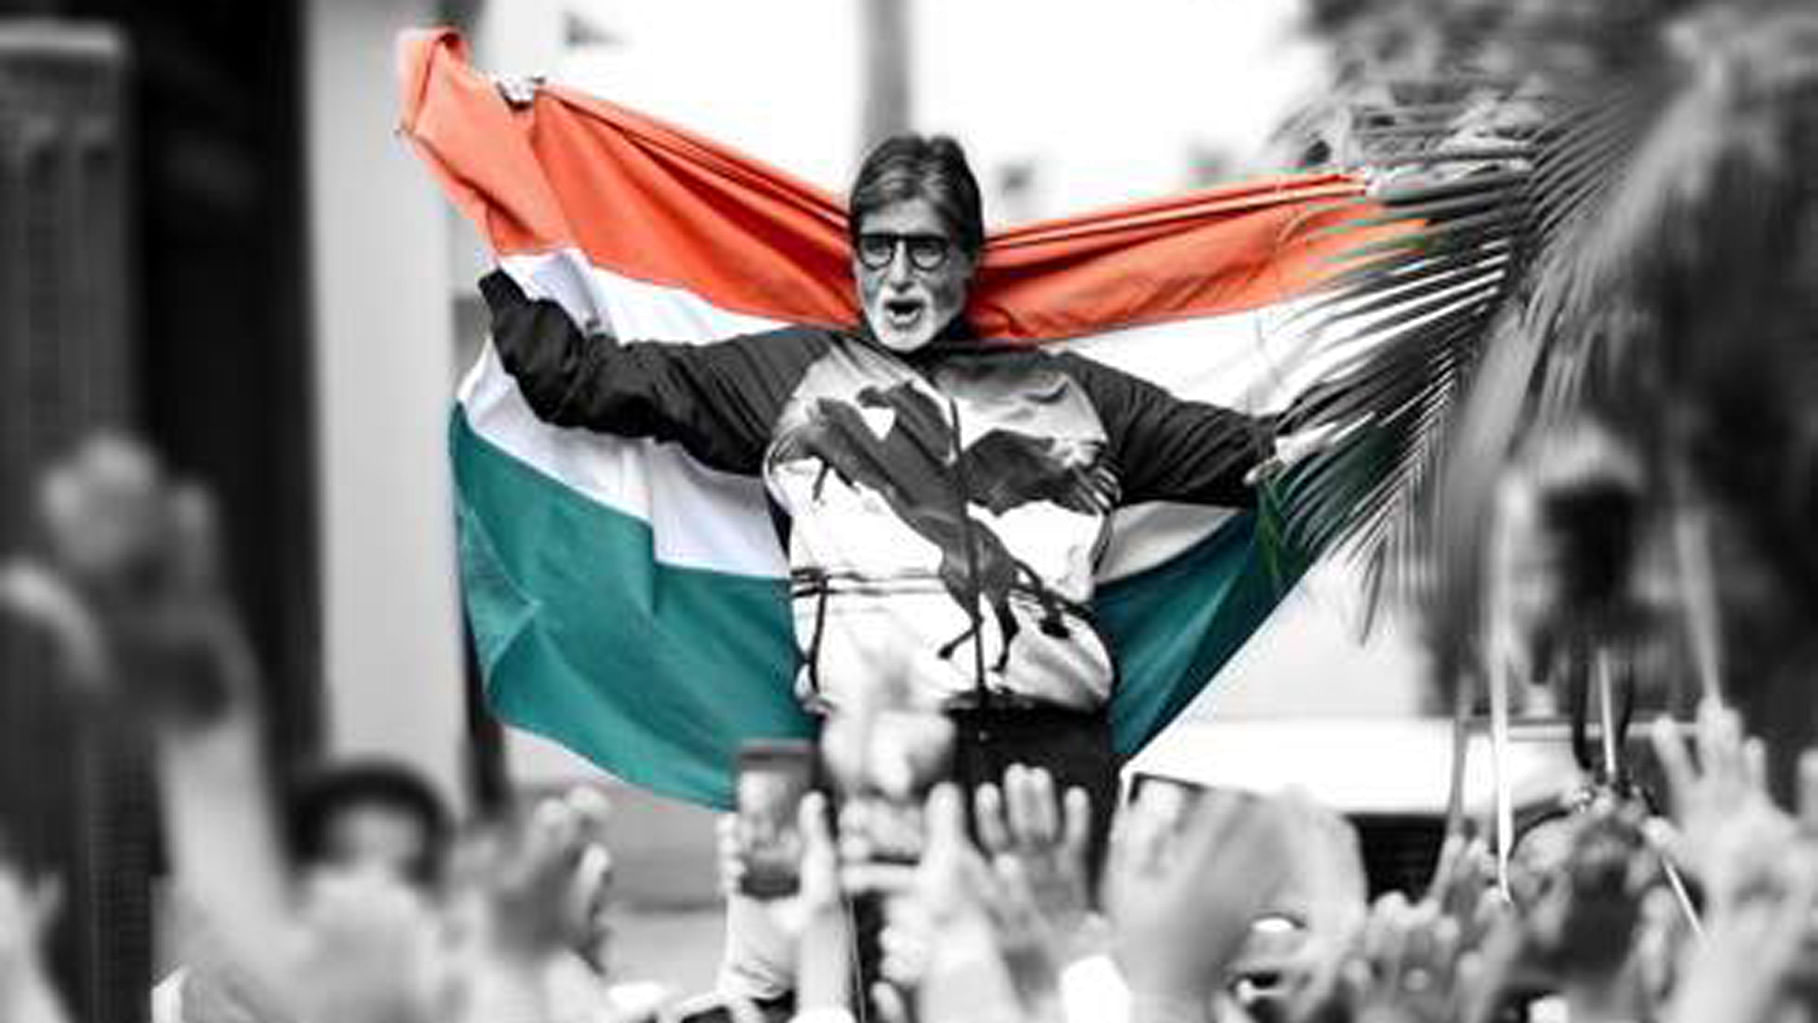 Amitabh Bacchan celebrating during a previous victory by India. (Photo Courtesy: Amitabh Bachchan’s <a href="https://www.facebook.com/AmitabhBachchan/?fref=ts">Facebook</a> Page)